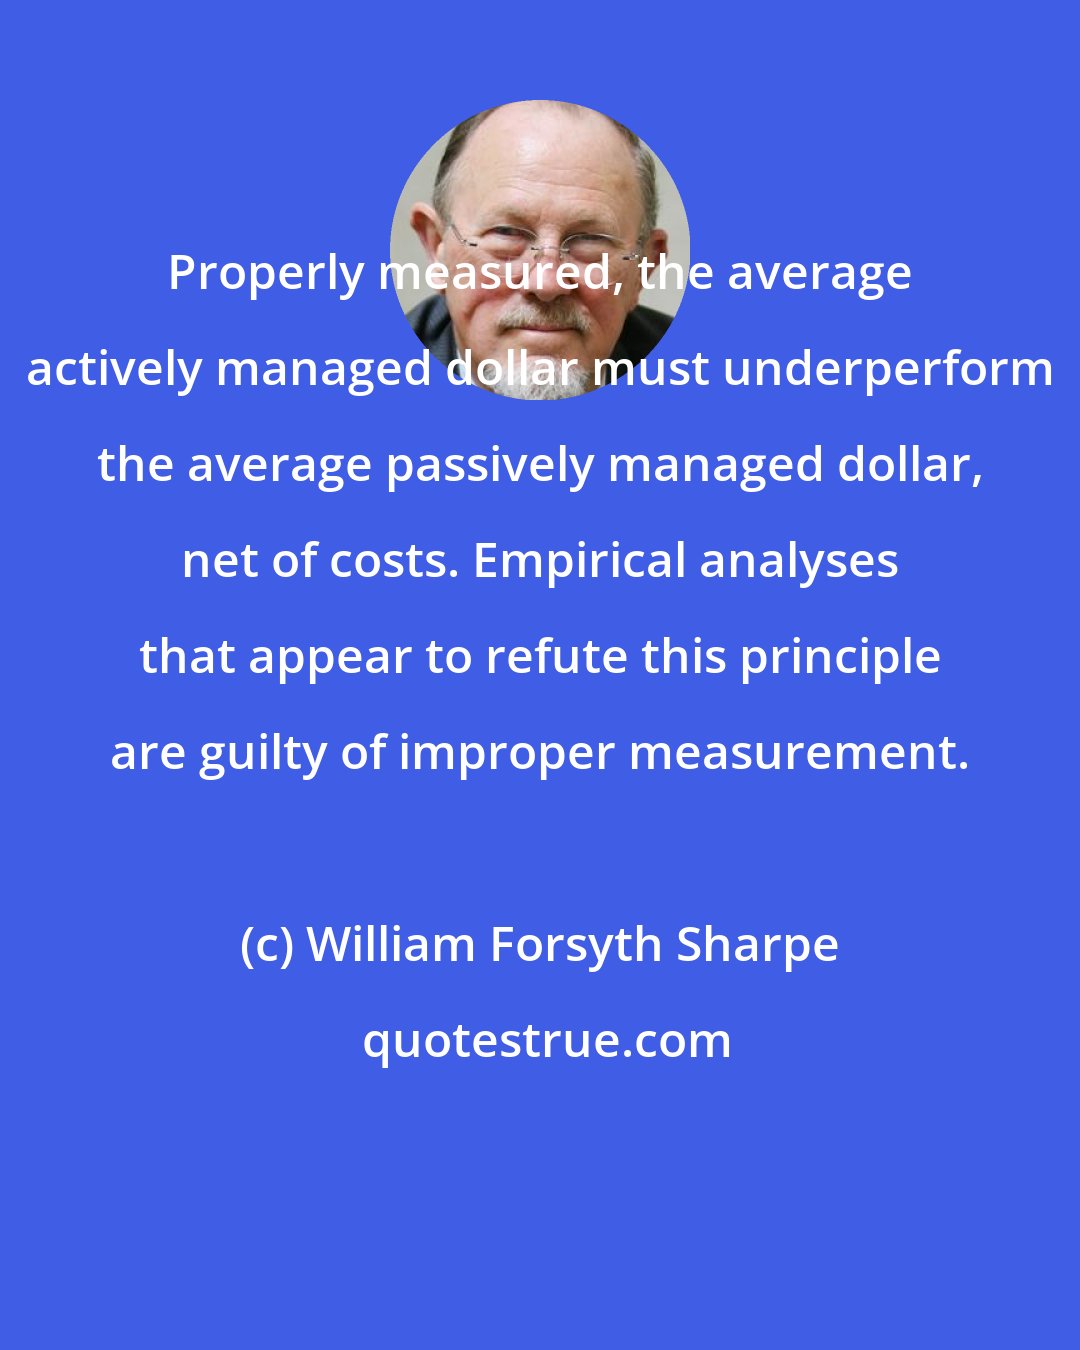 William Forsyth Sharpe: Properly measured, the average actively managed dollar must underperform the average passively managed dollar, net of costs. Empirical analyses that appear to refute this principle are guilty of improper measurement.